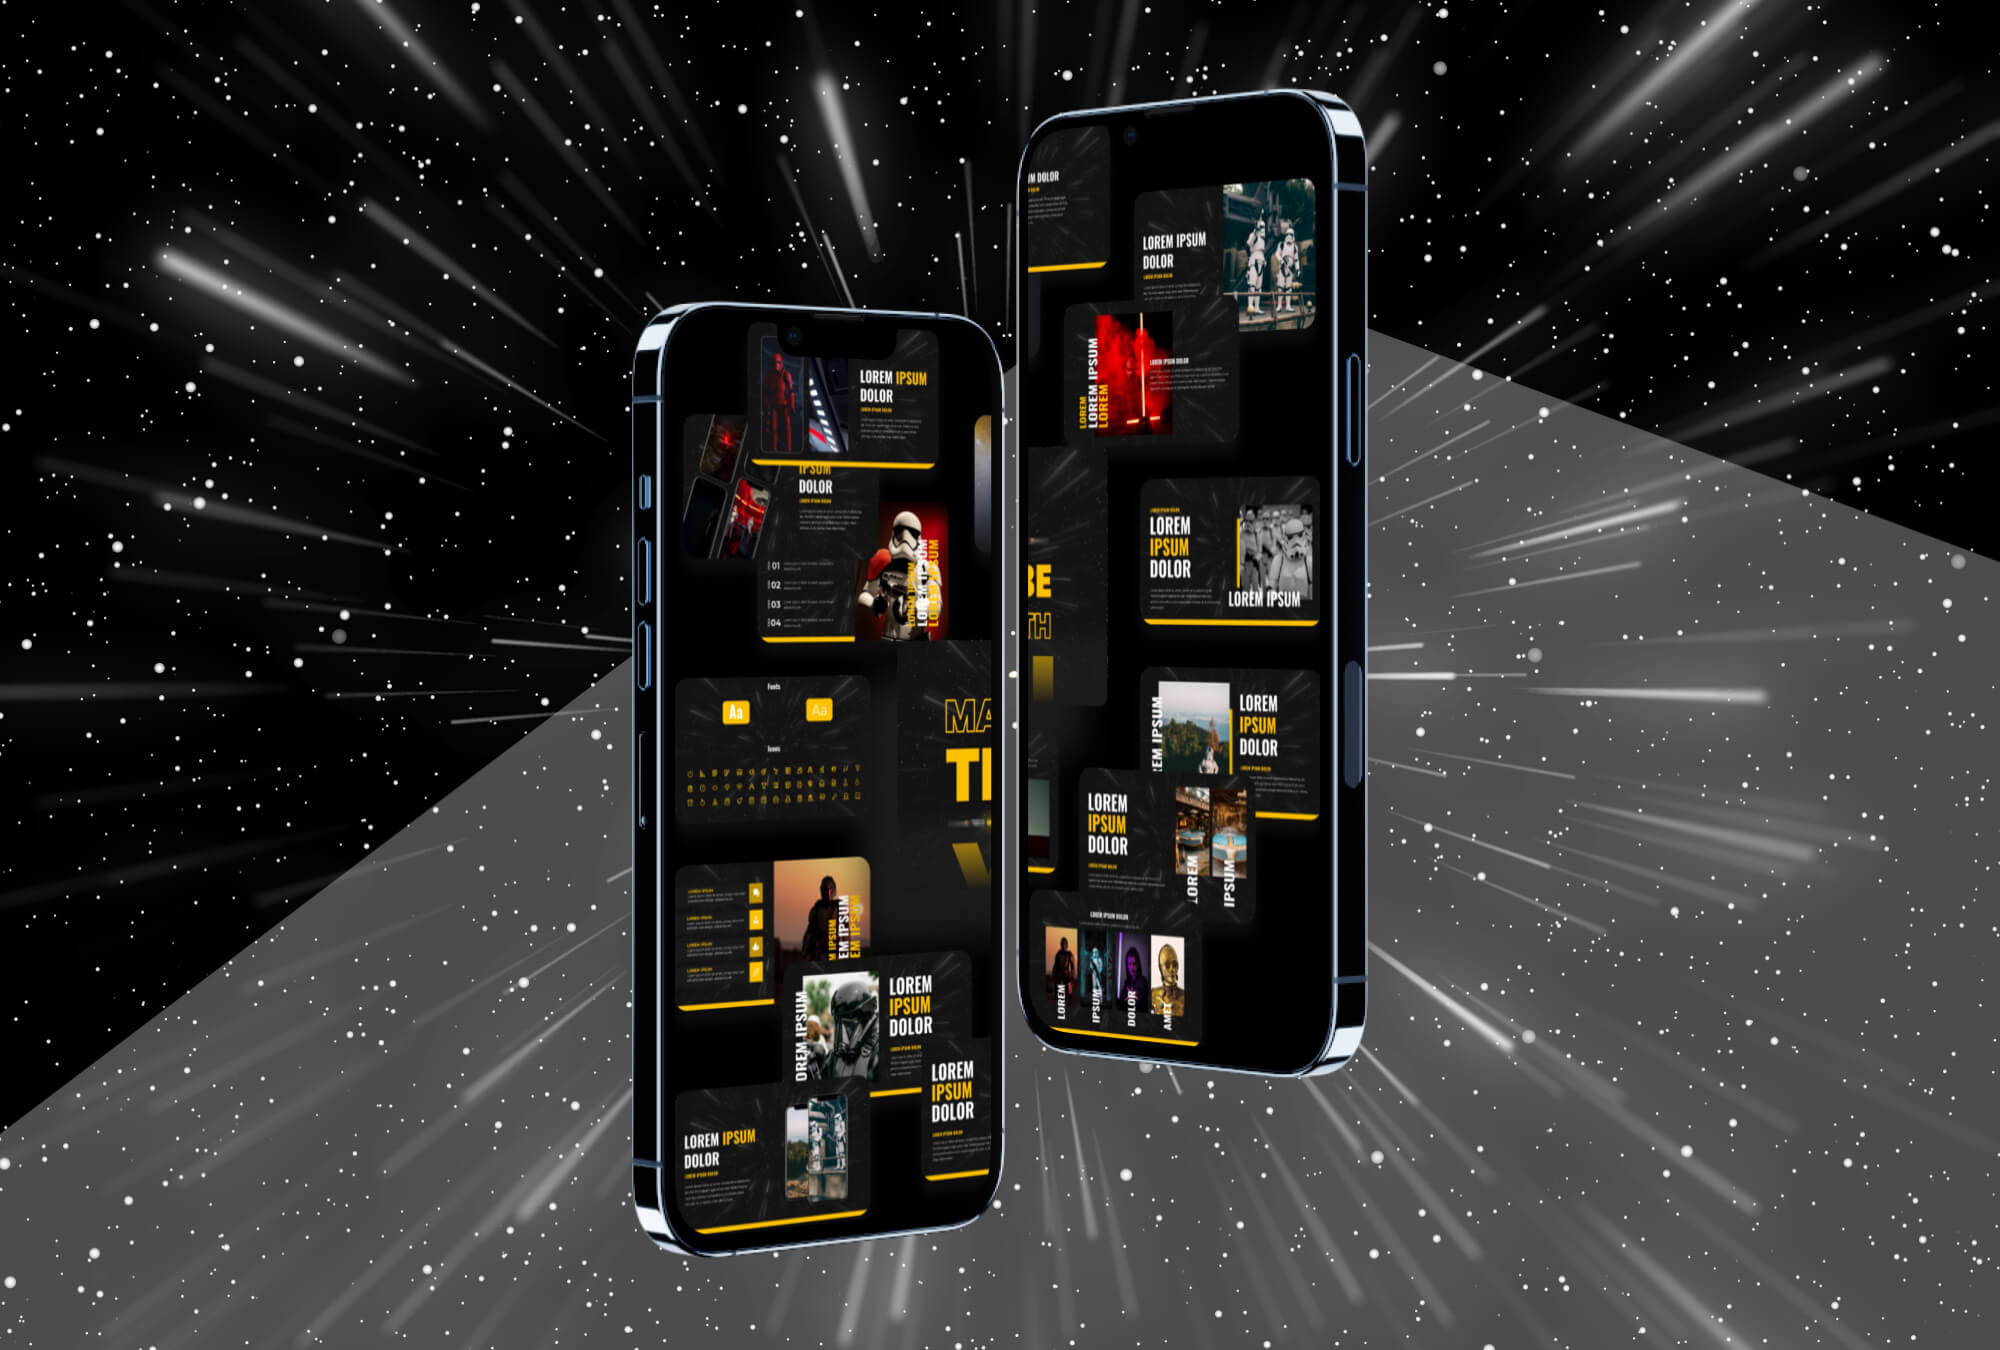 May4th Star Wars Presentation Template iphone.